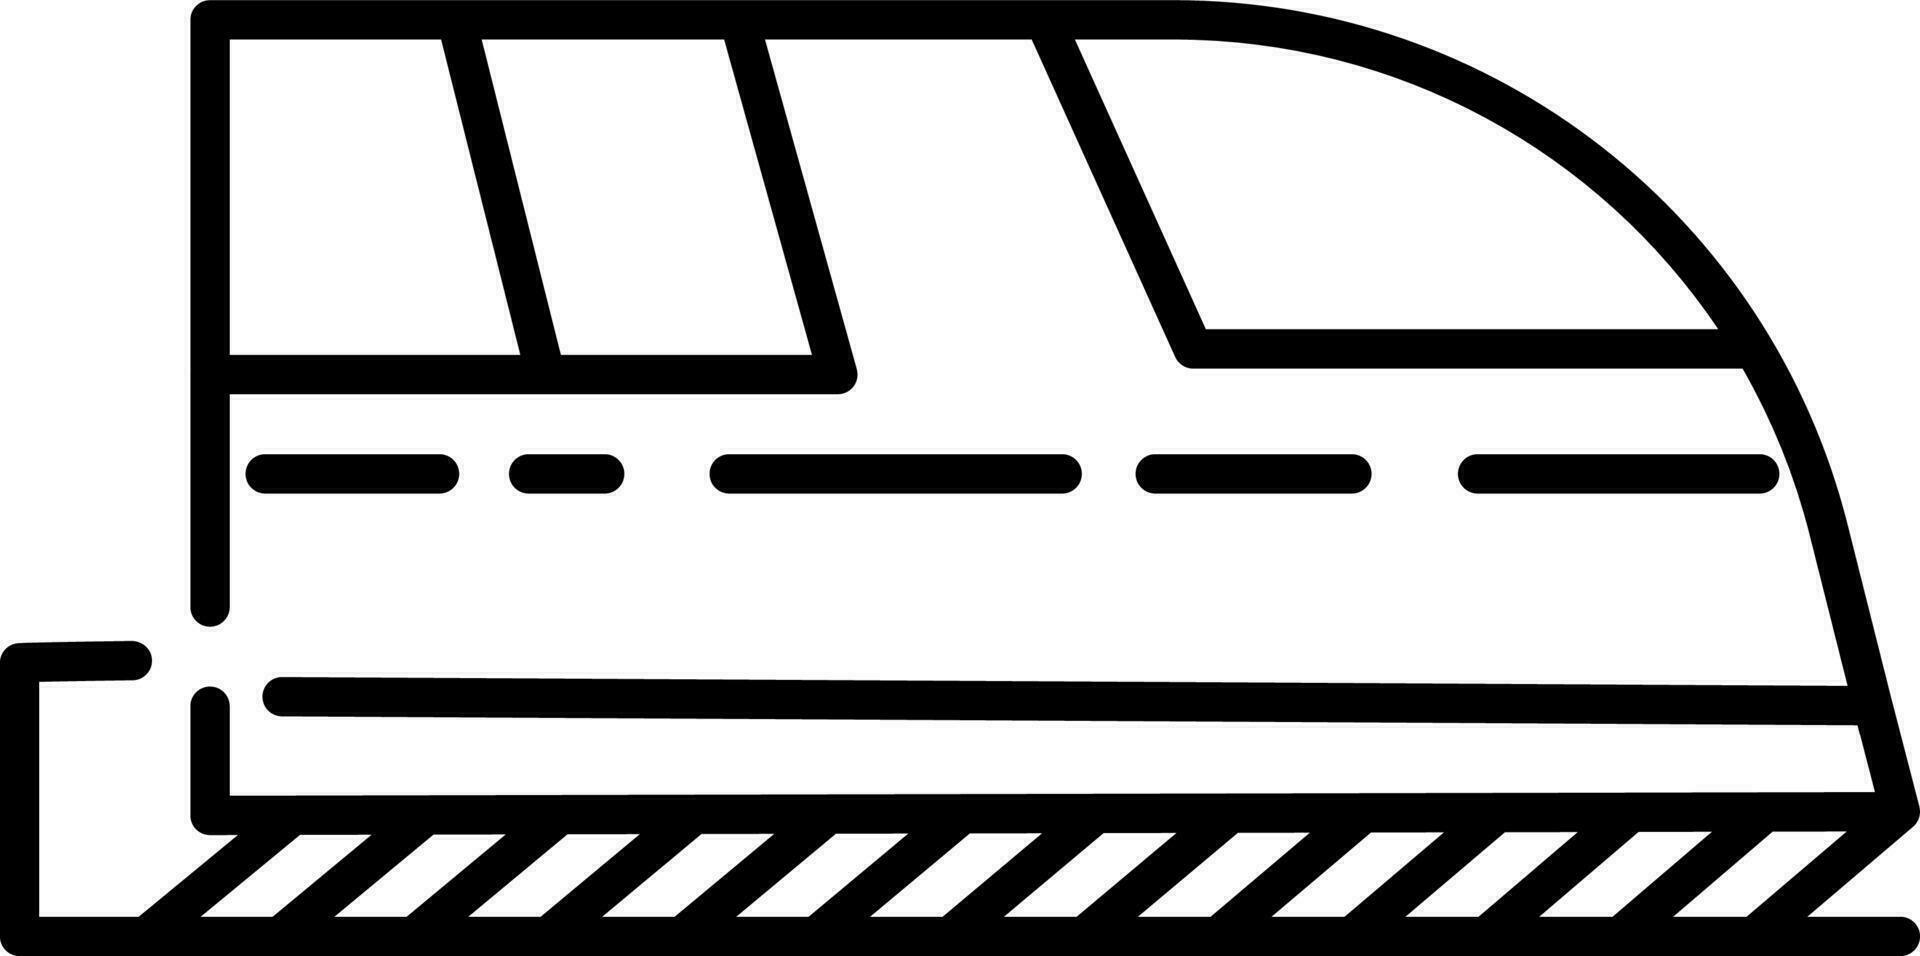 Flat Style Train Icon in Line Art. vector